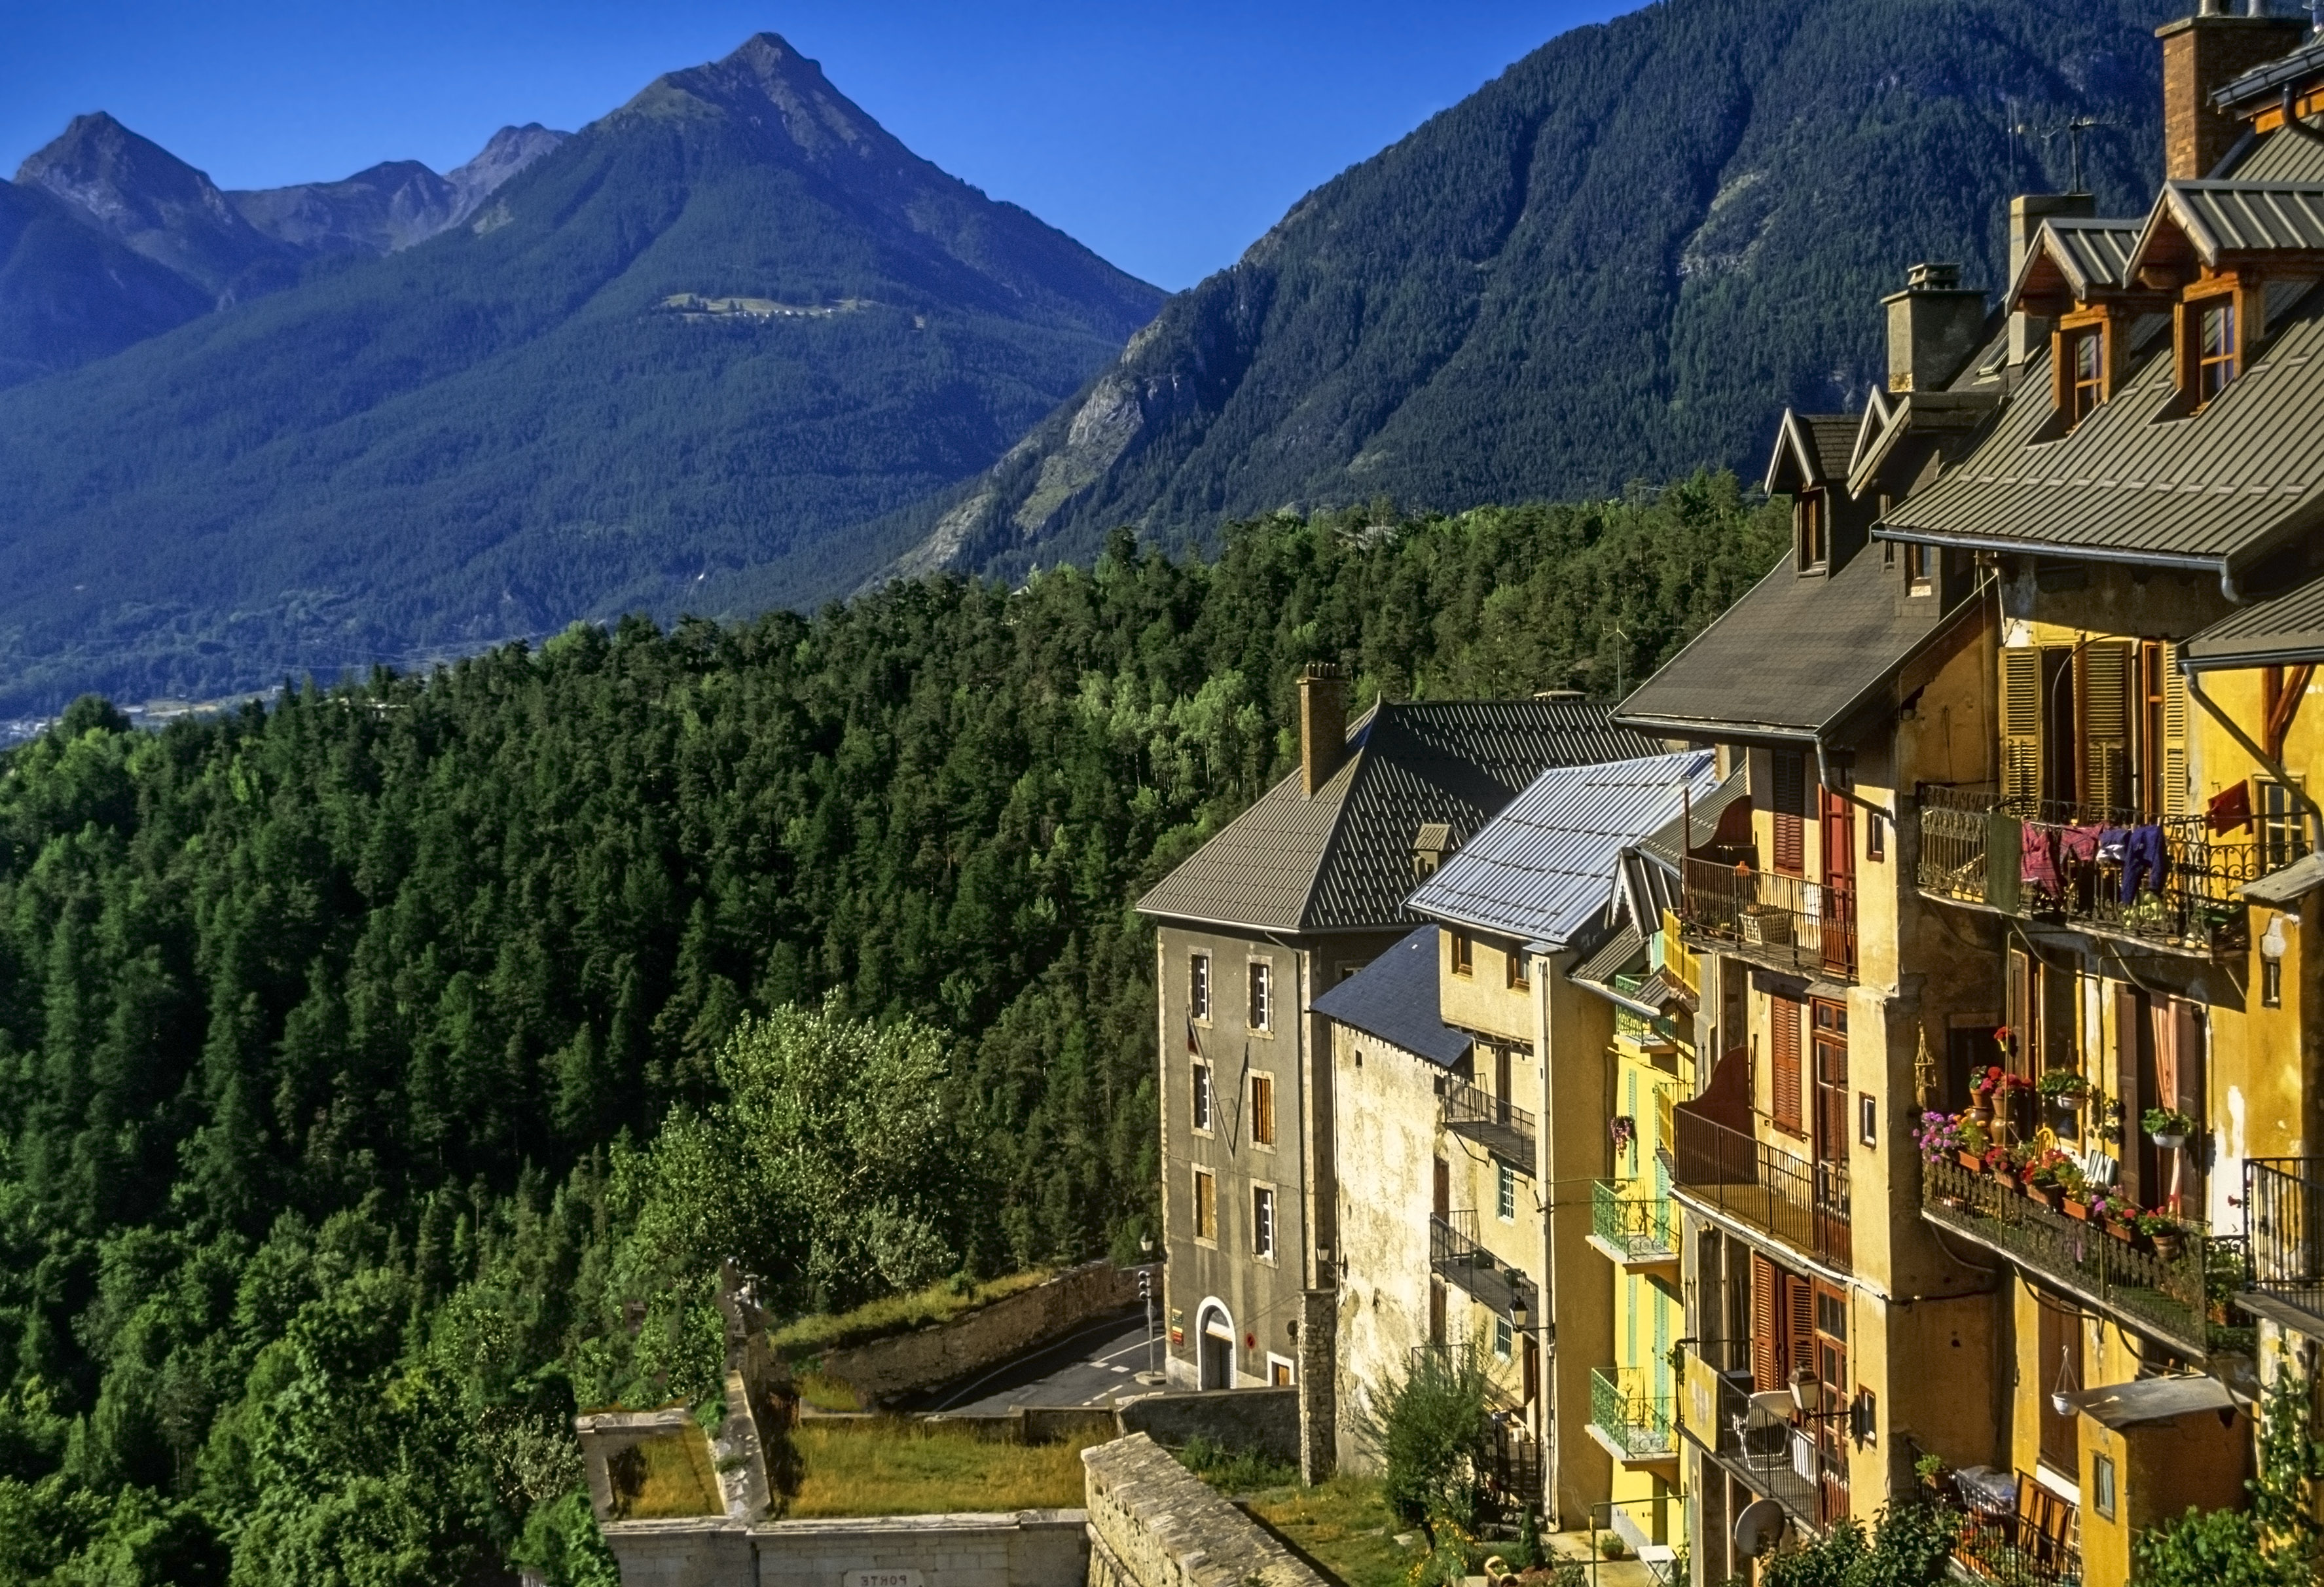 Visit These Storybook Towns During Your Next Family Vacation in France - Briancon in the Alps